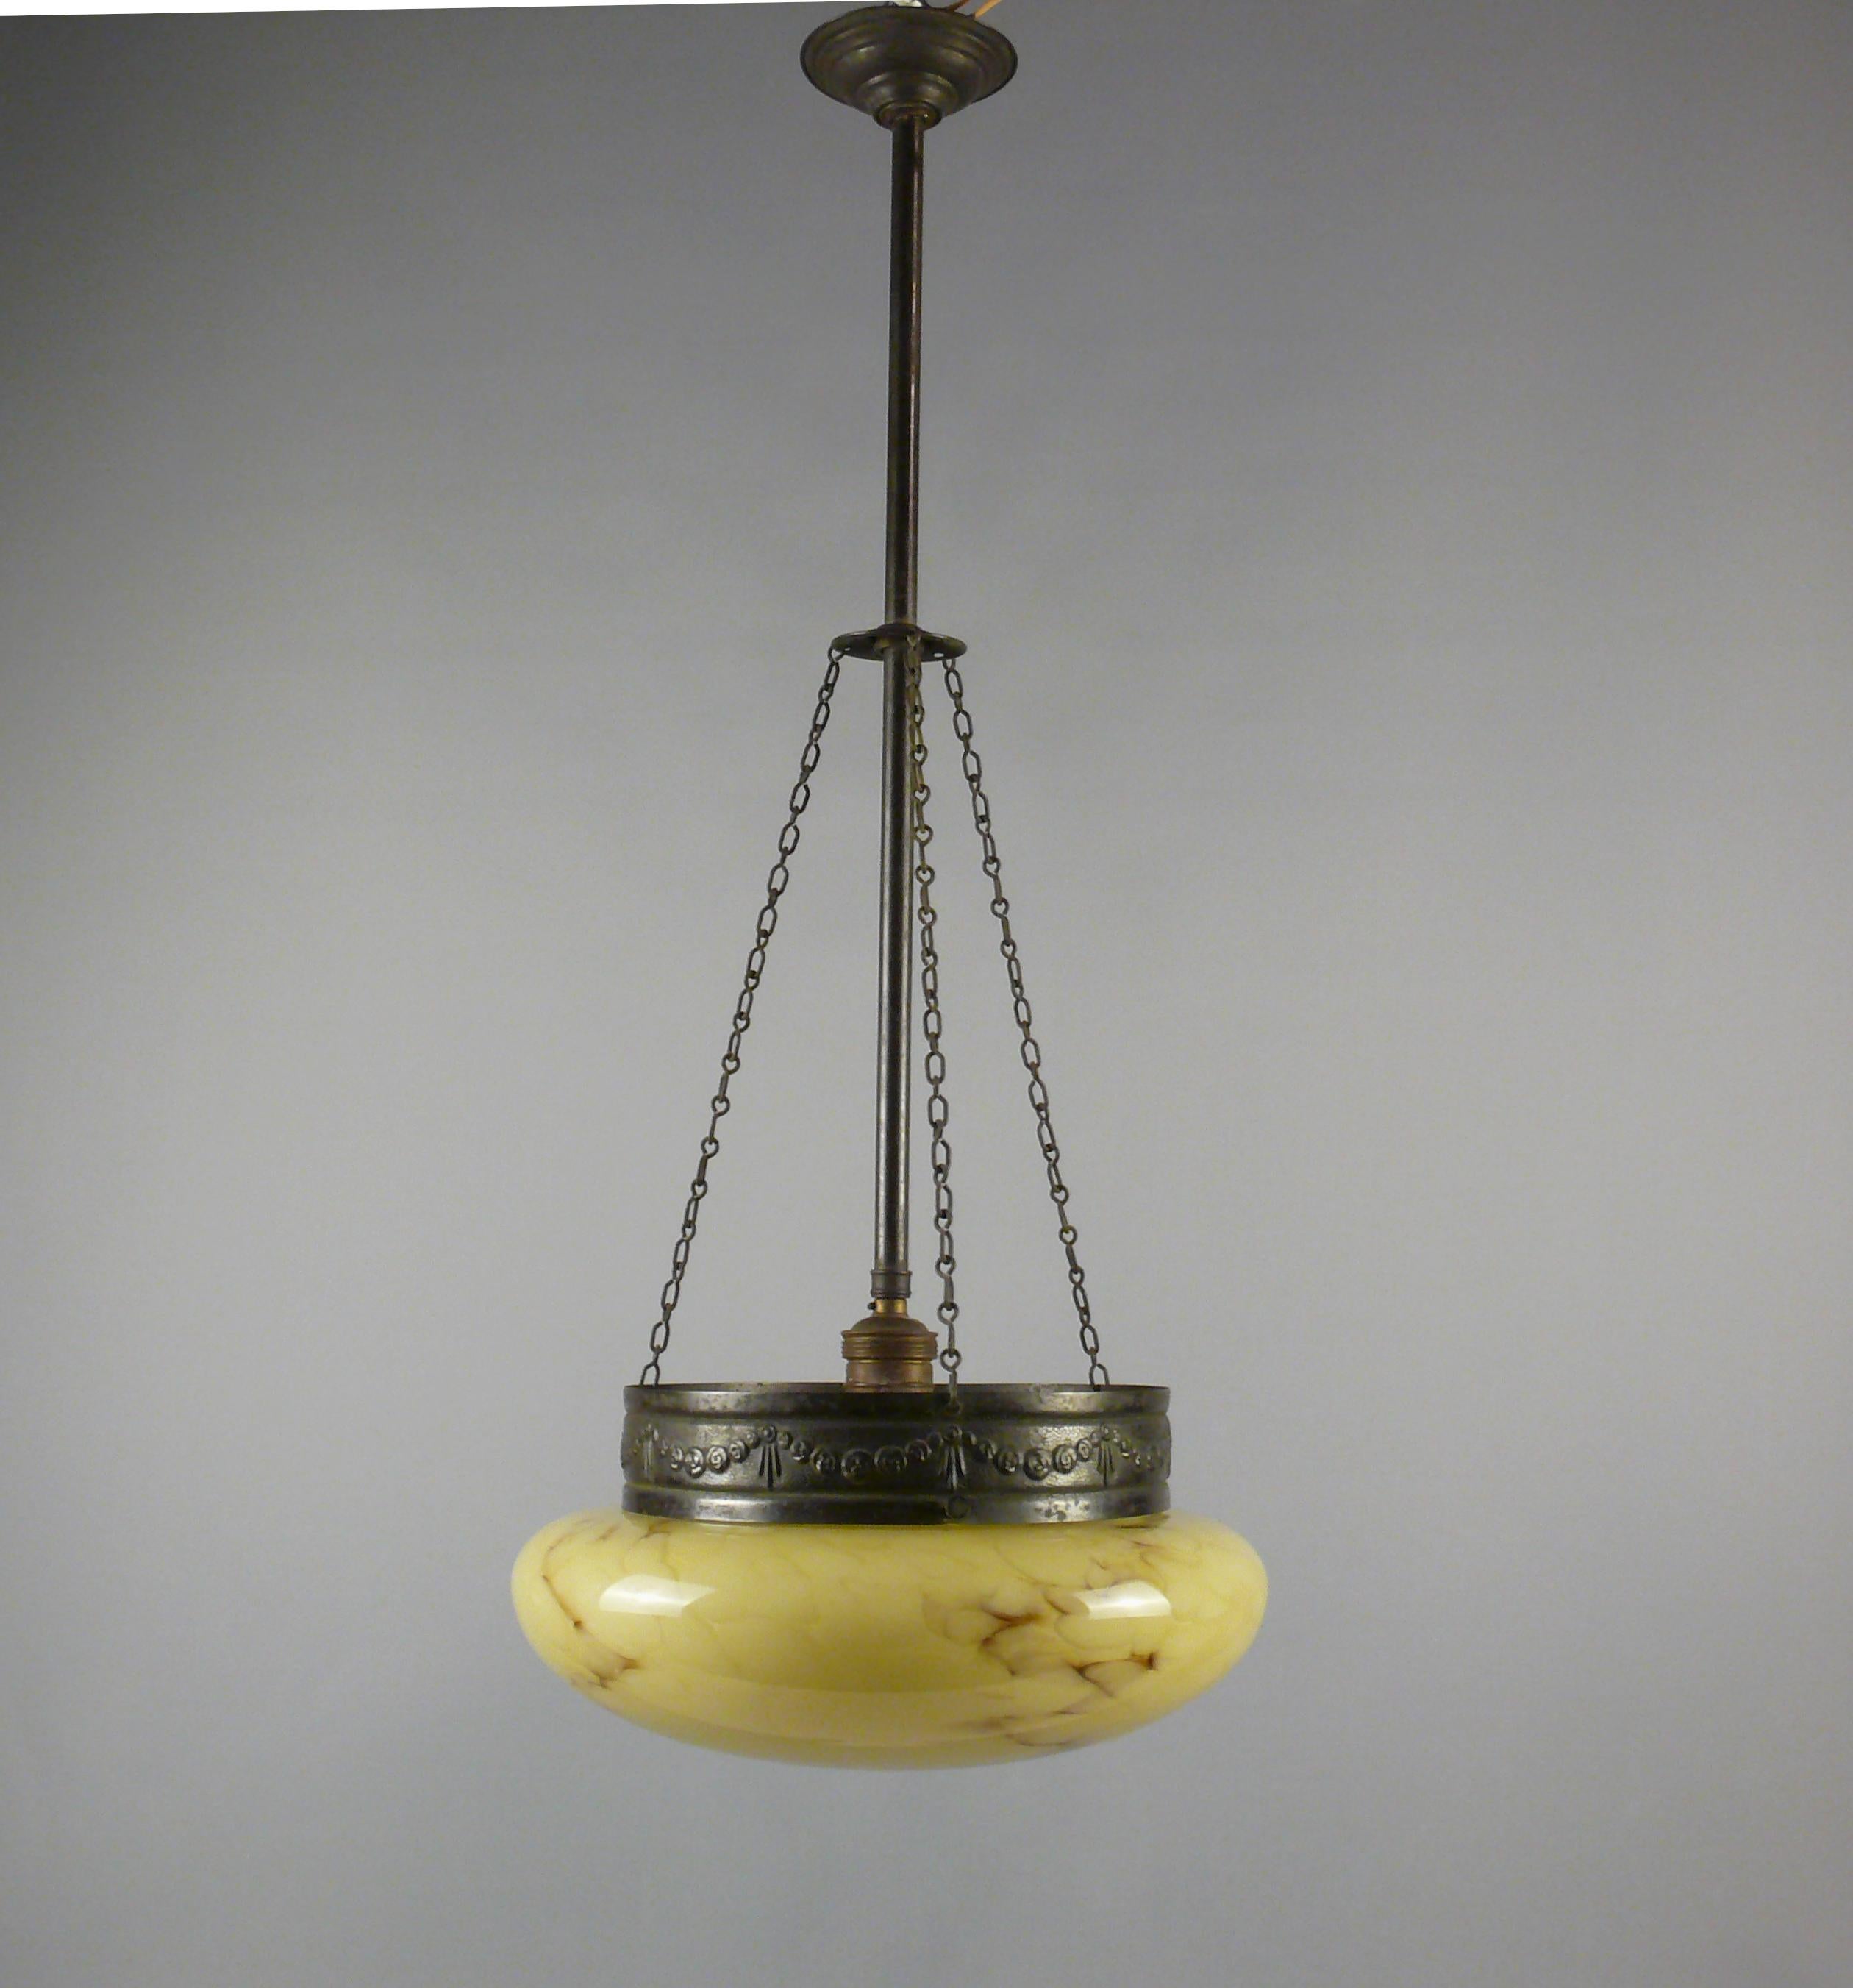 

Pendant lamp from the 1910s - 1930s with a marbled glass shade and in very good condition. The dark yellow glass shade has a beautiful shape and subtle marbling. The elaborate bronze suspension consists of a pendulum rod that holds the socket and